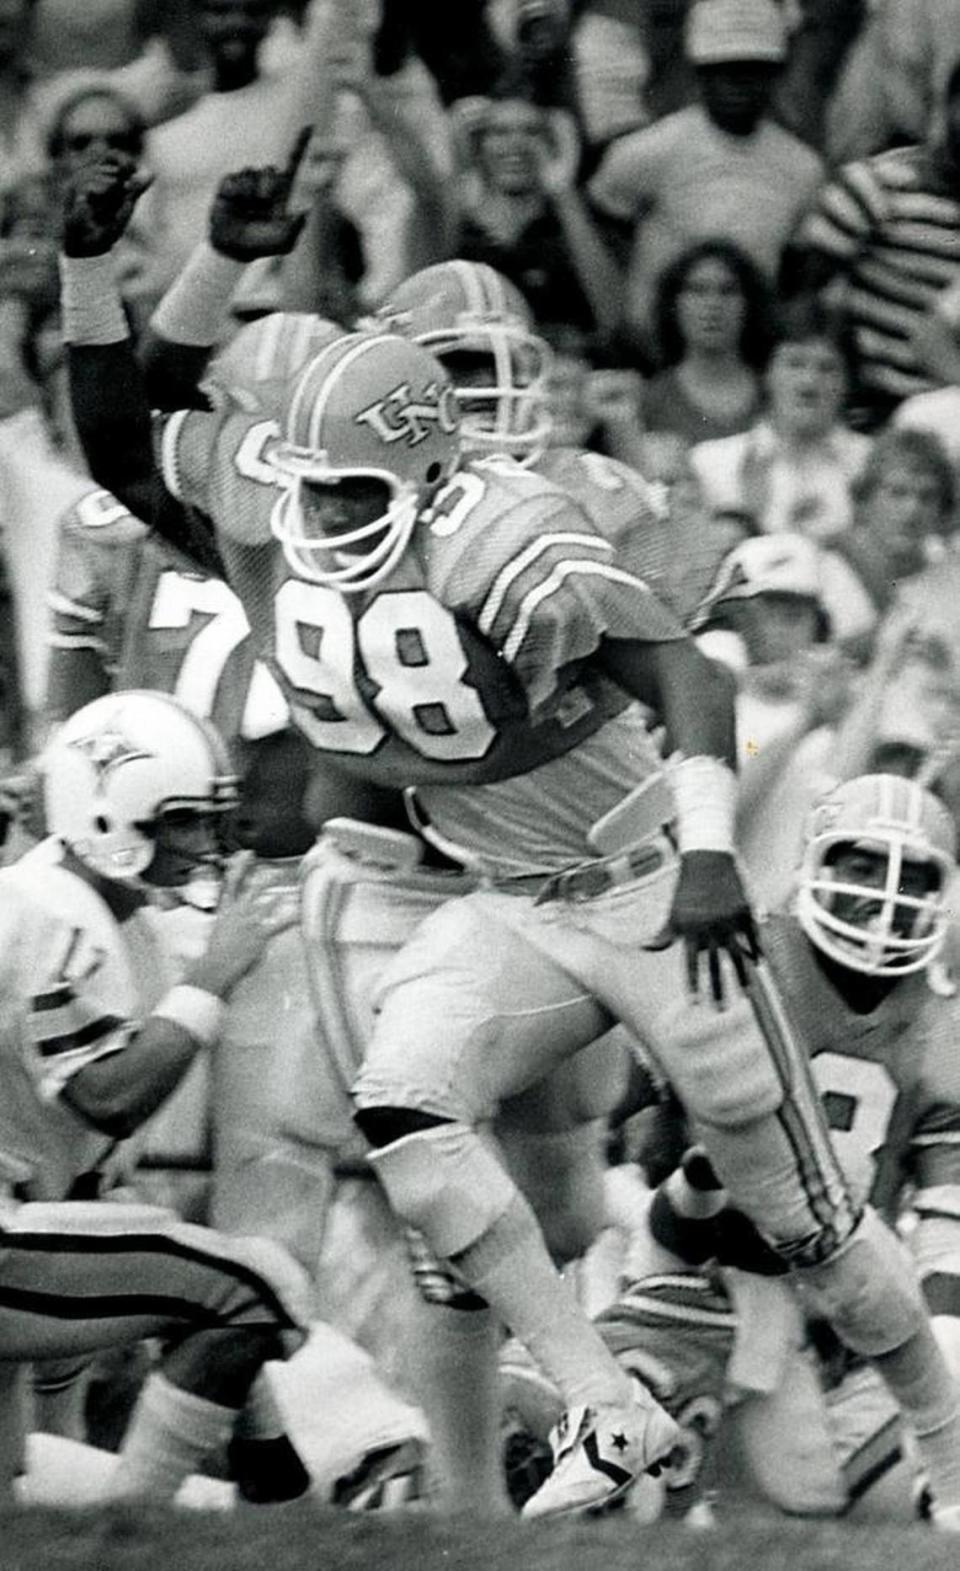 UNC’s Lawrence Taylor (98) in game action against Furman on Sept. 6, 1980 at Kenan Stadium in Chapel Hill.